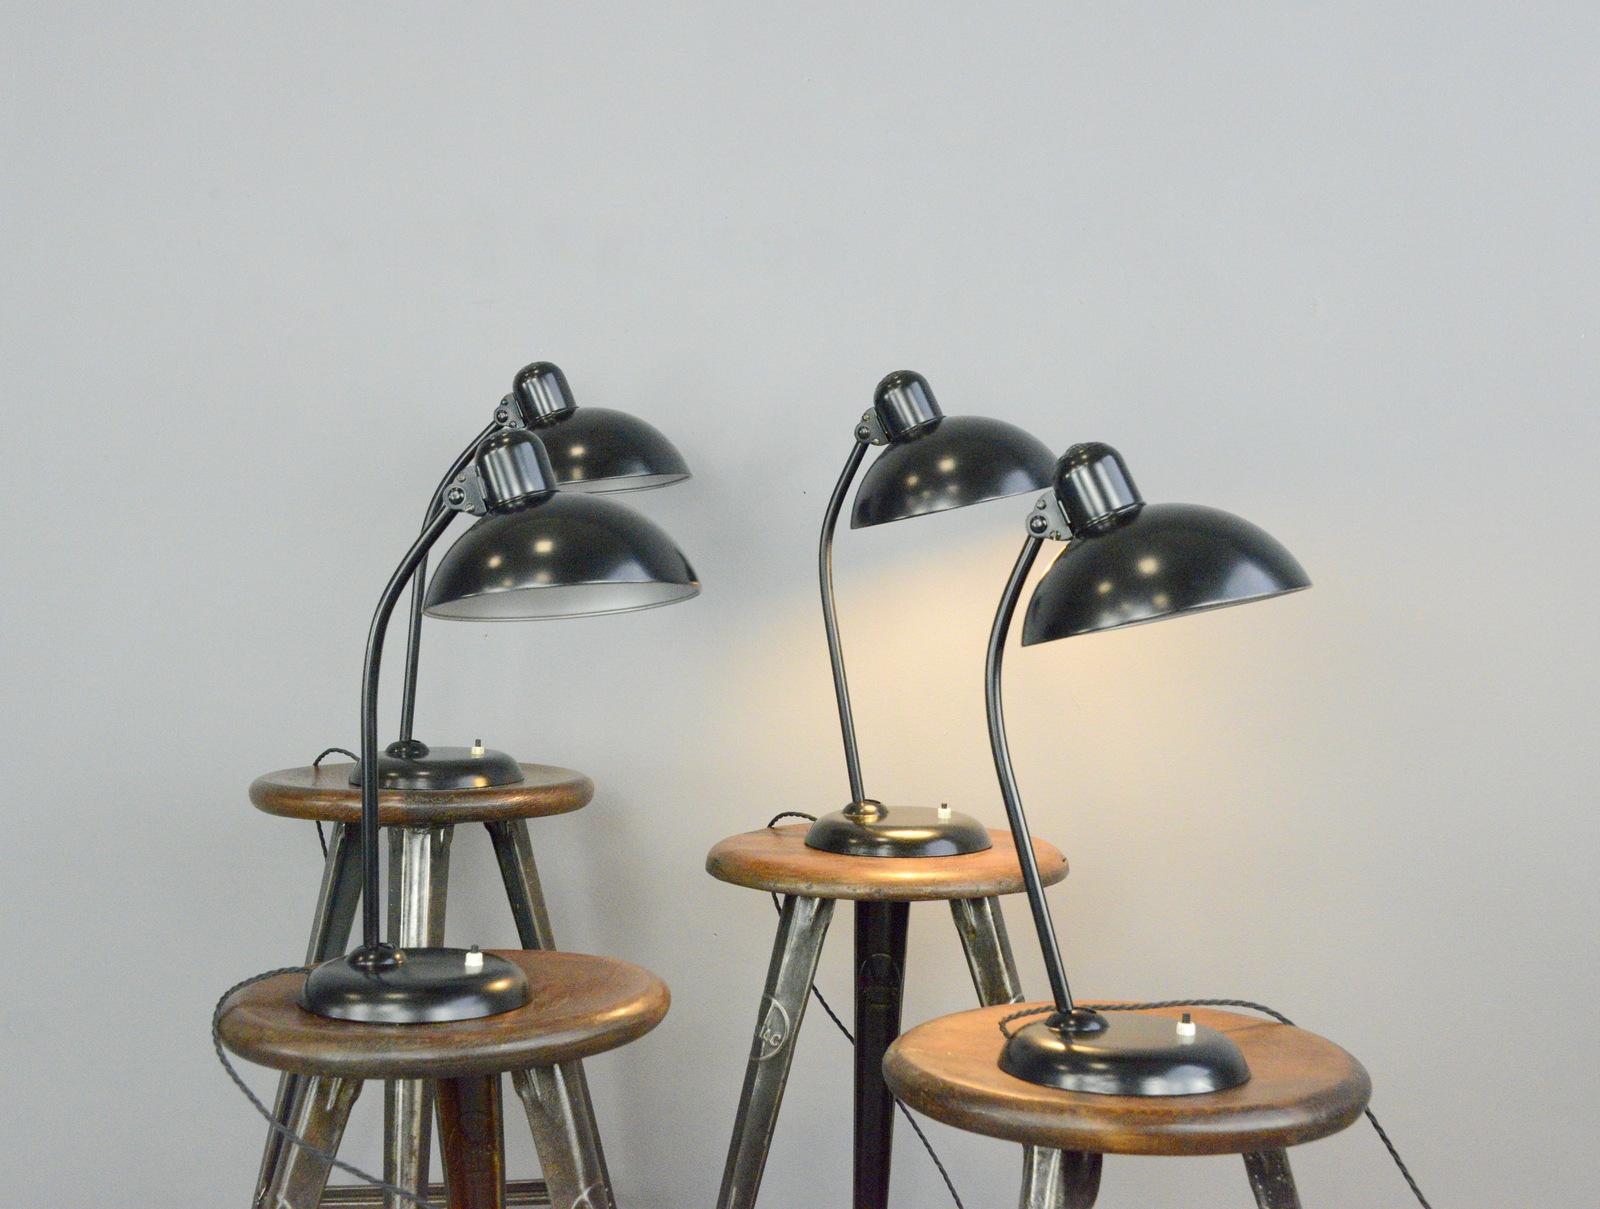 Steel Model 6556 Table Lamps by Kaiser Idell, circa 1930s